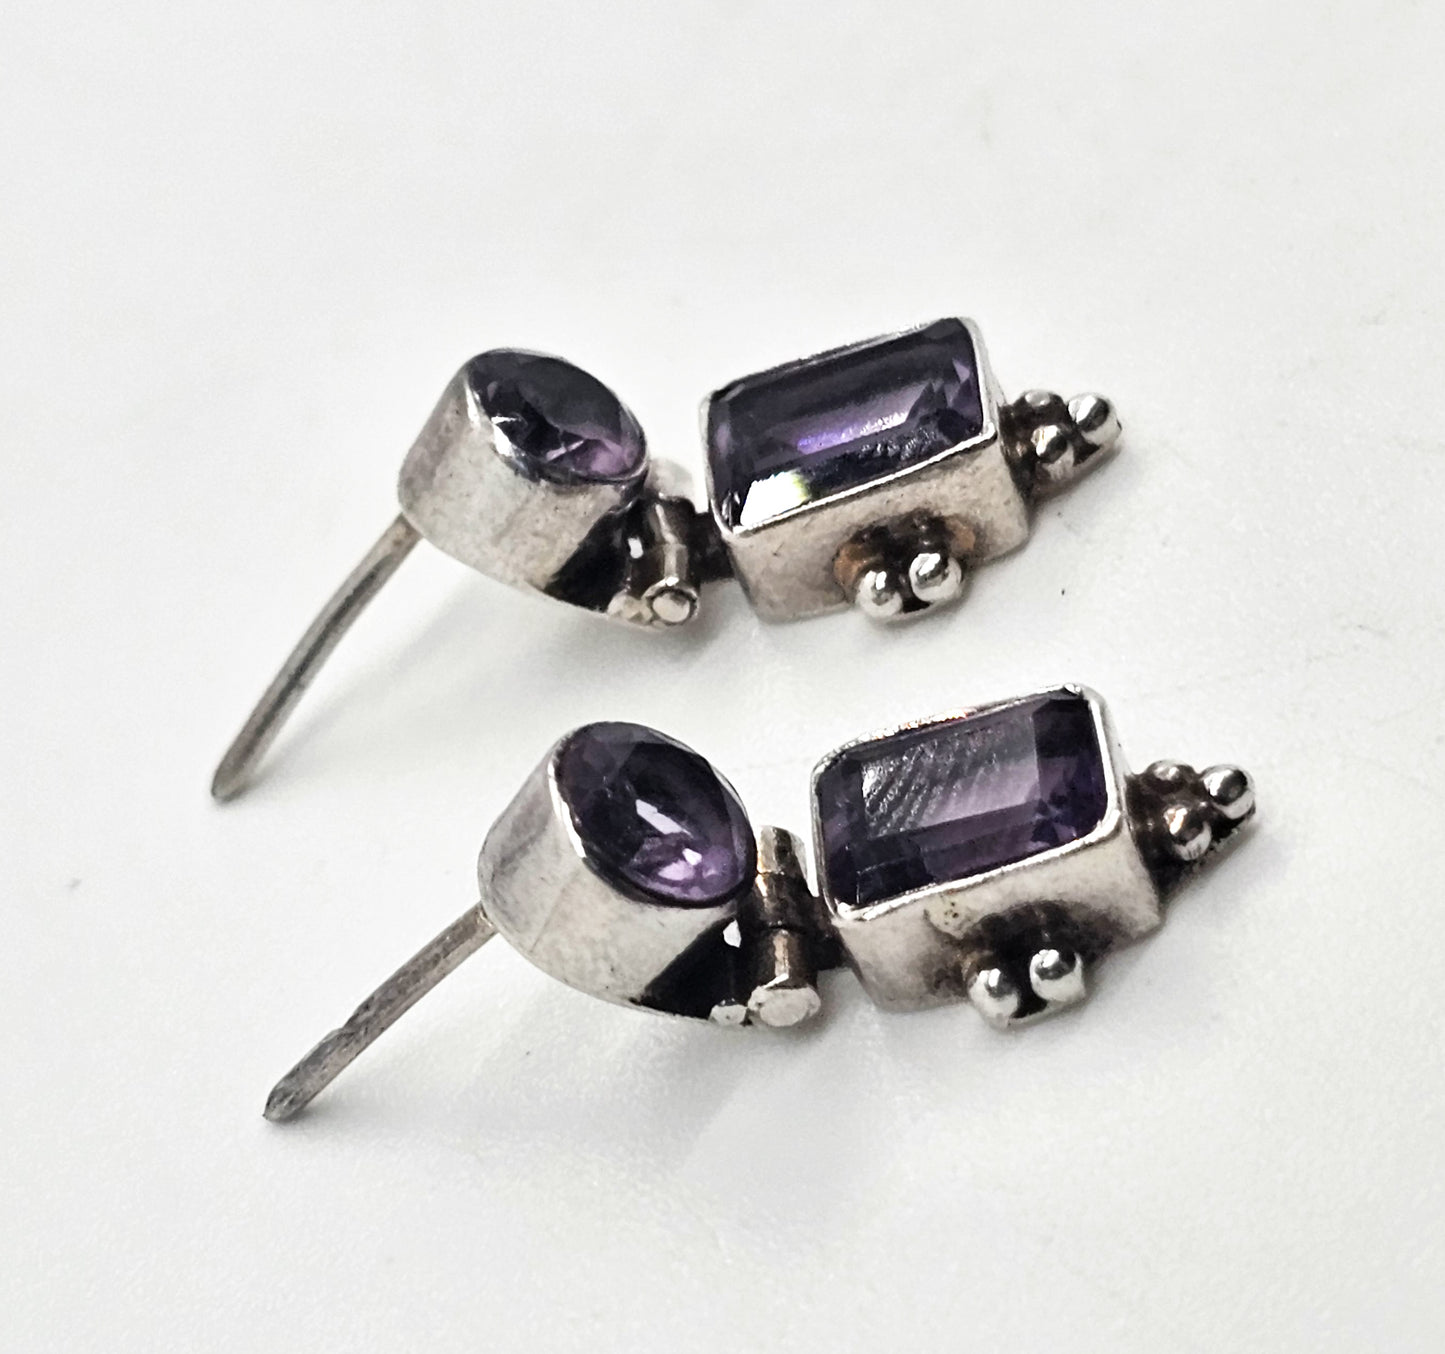 Amethyst faceted Bali Balinese style thick sterling silver articulated drop earrings